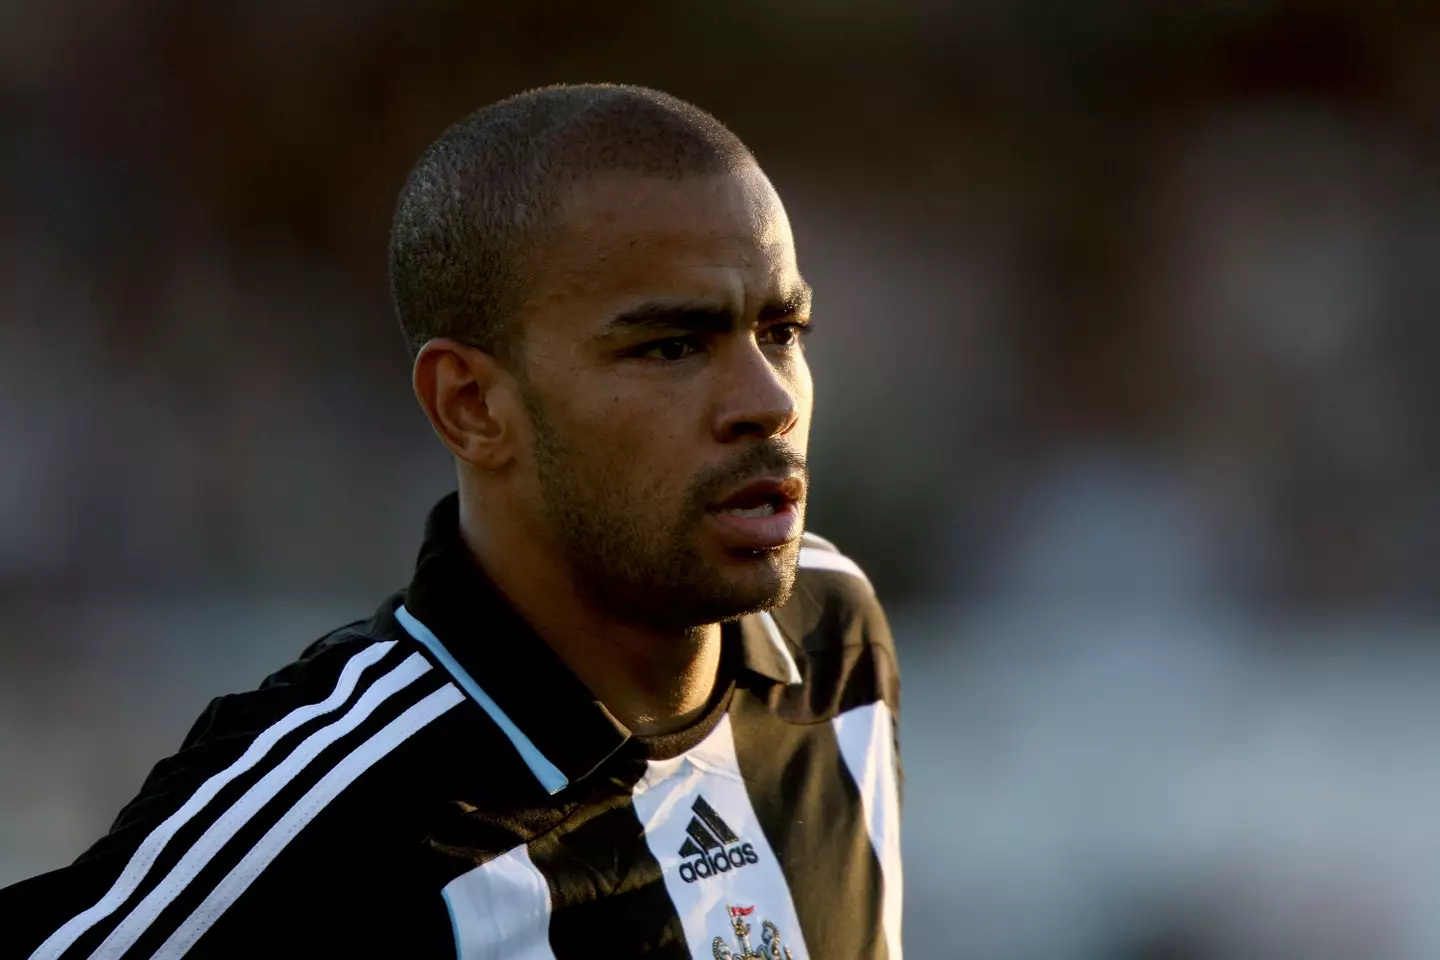 Kieron Dyer admits he was sometimes afraid of Souness while at Newcastle (Image credit: PA)